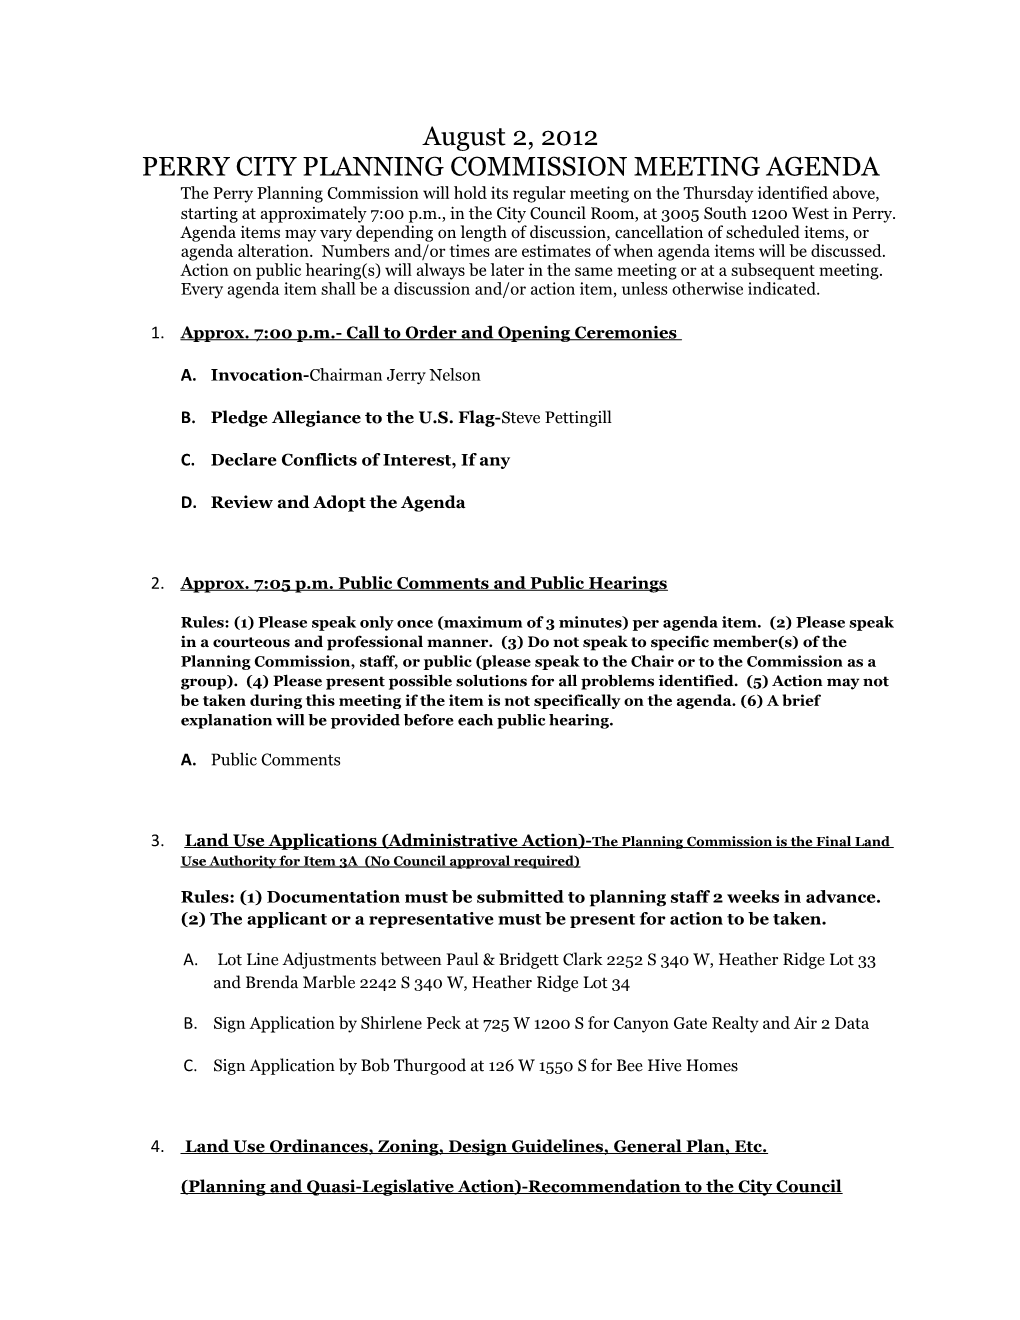 Perry City Planning Commission Meeting Agenda